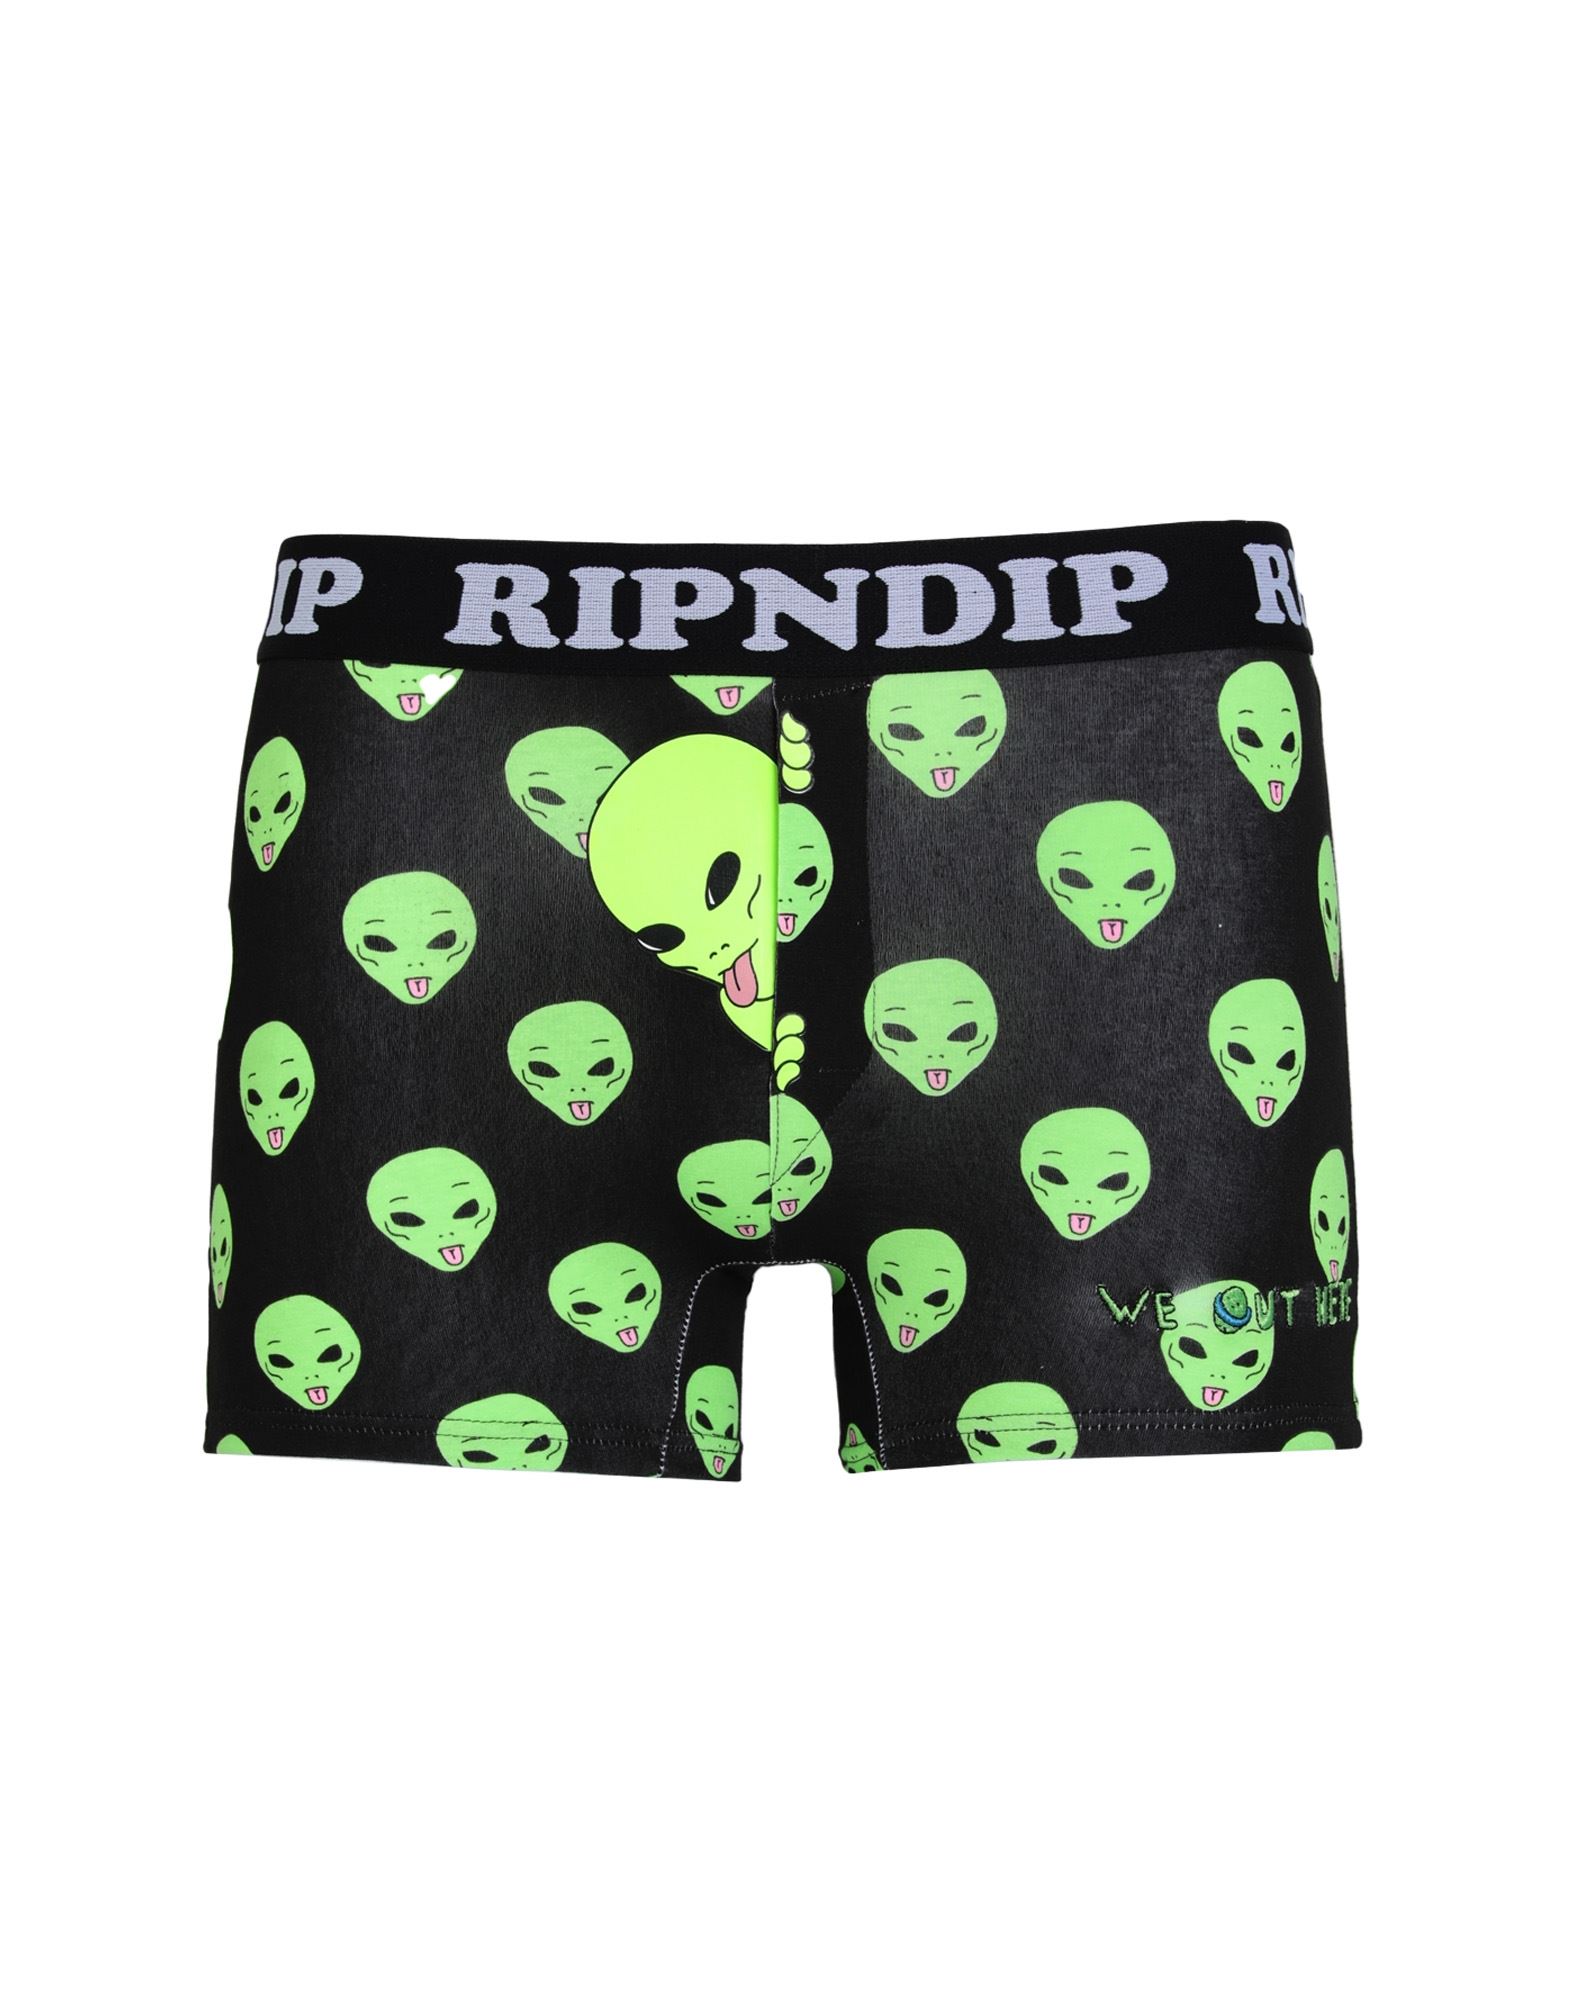 ԥ볫RIPNDIP  ȥ󥯥 ֥å S åȥ 93% / ݥꥨƥ 7% We Out Here Boxers